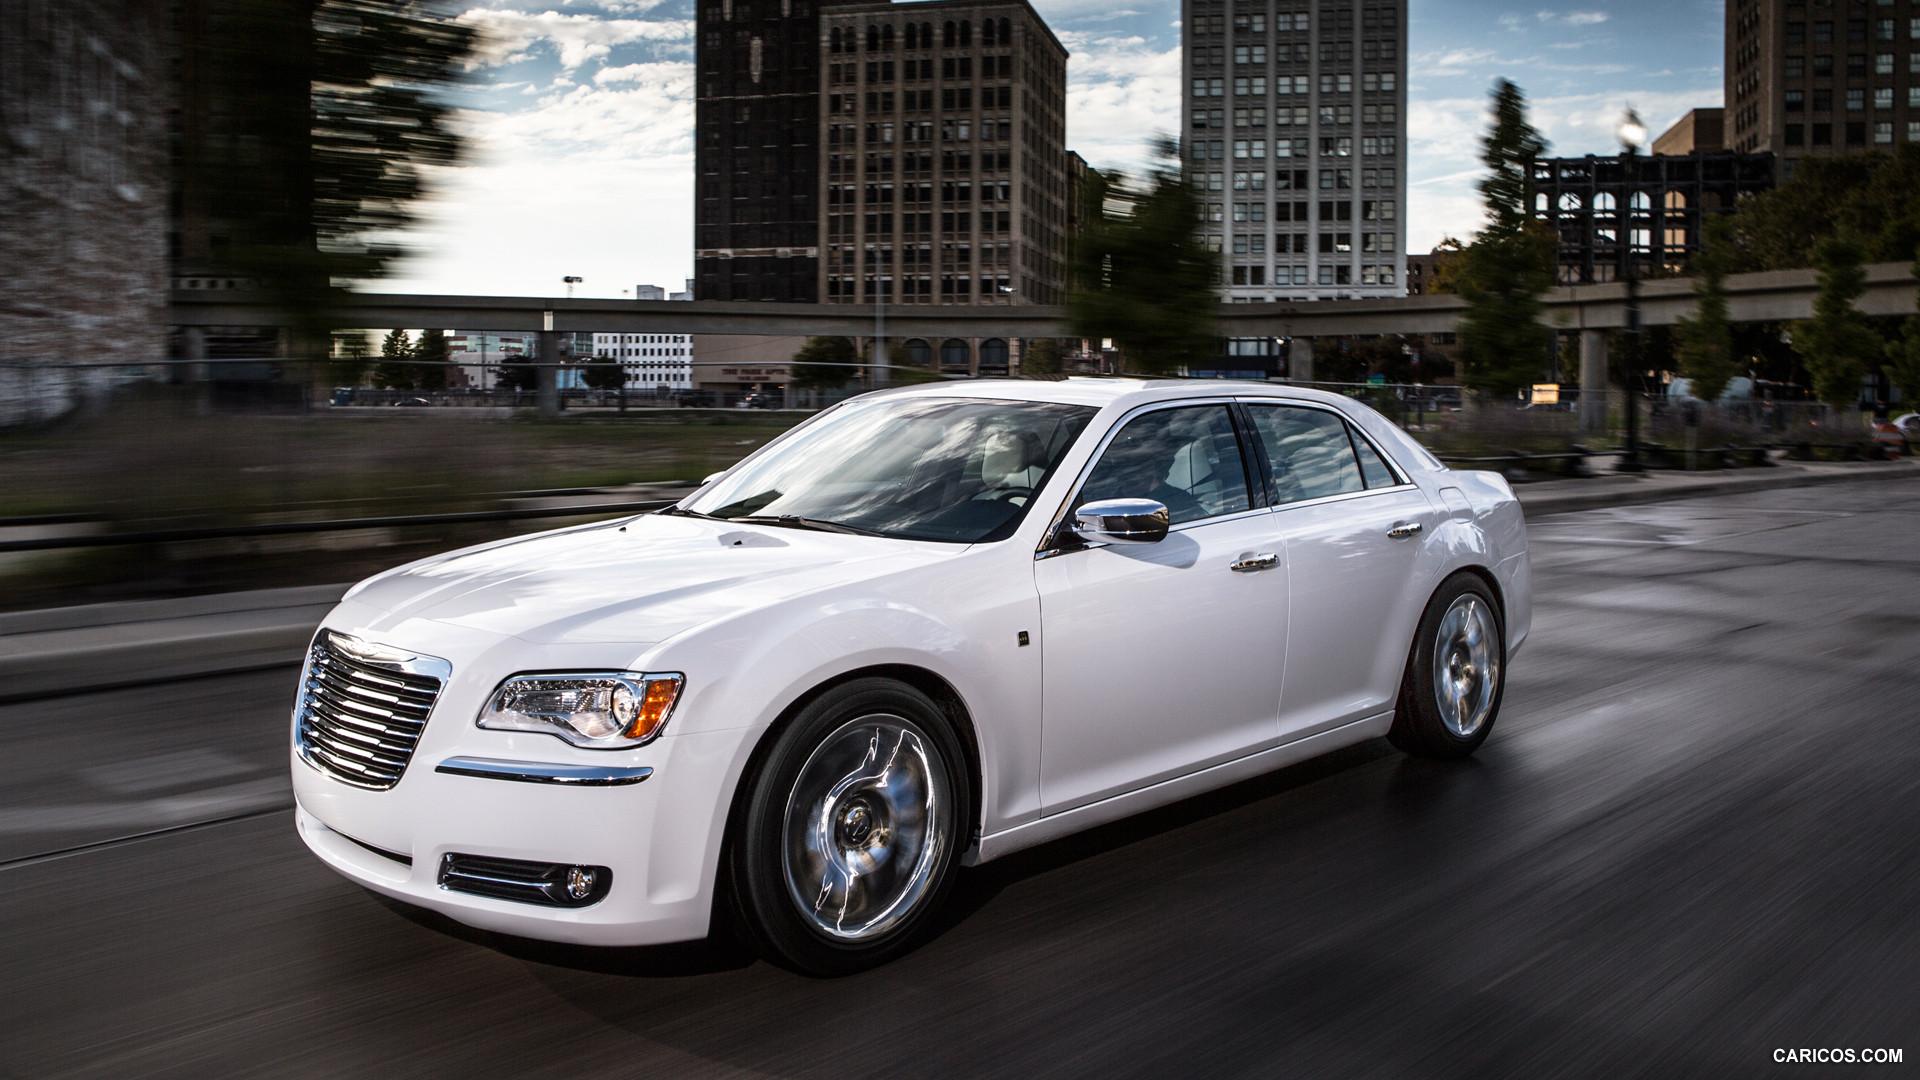 Chrysler 300 Motown Edition picture. Chrysler photo gallery